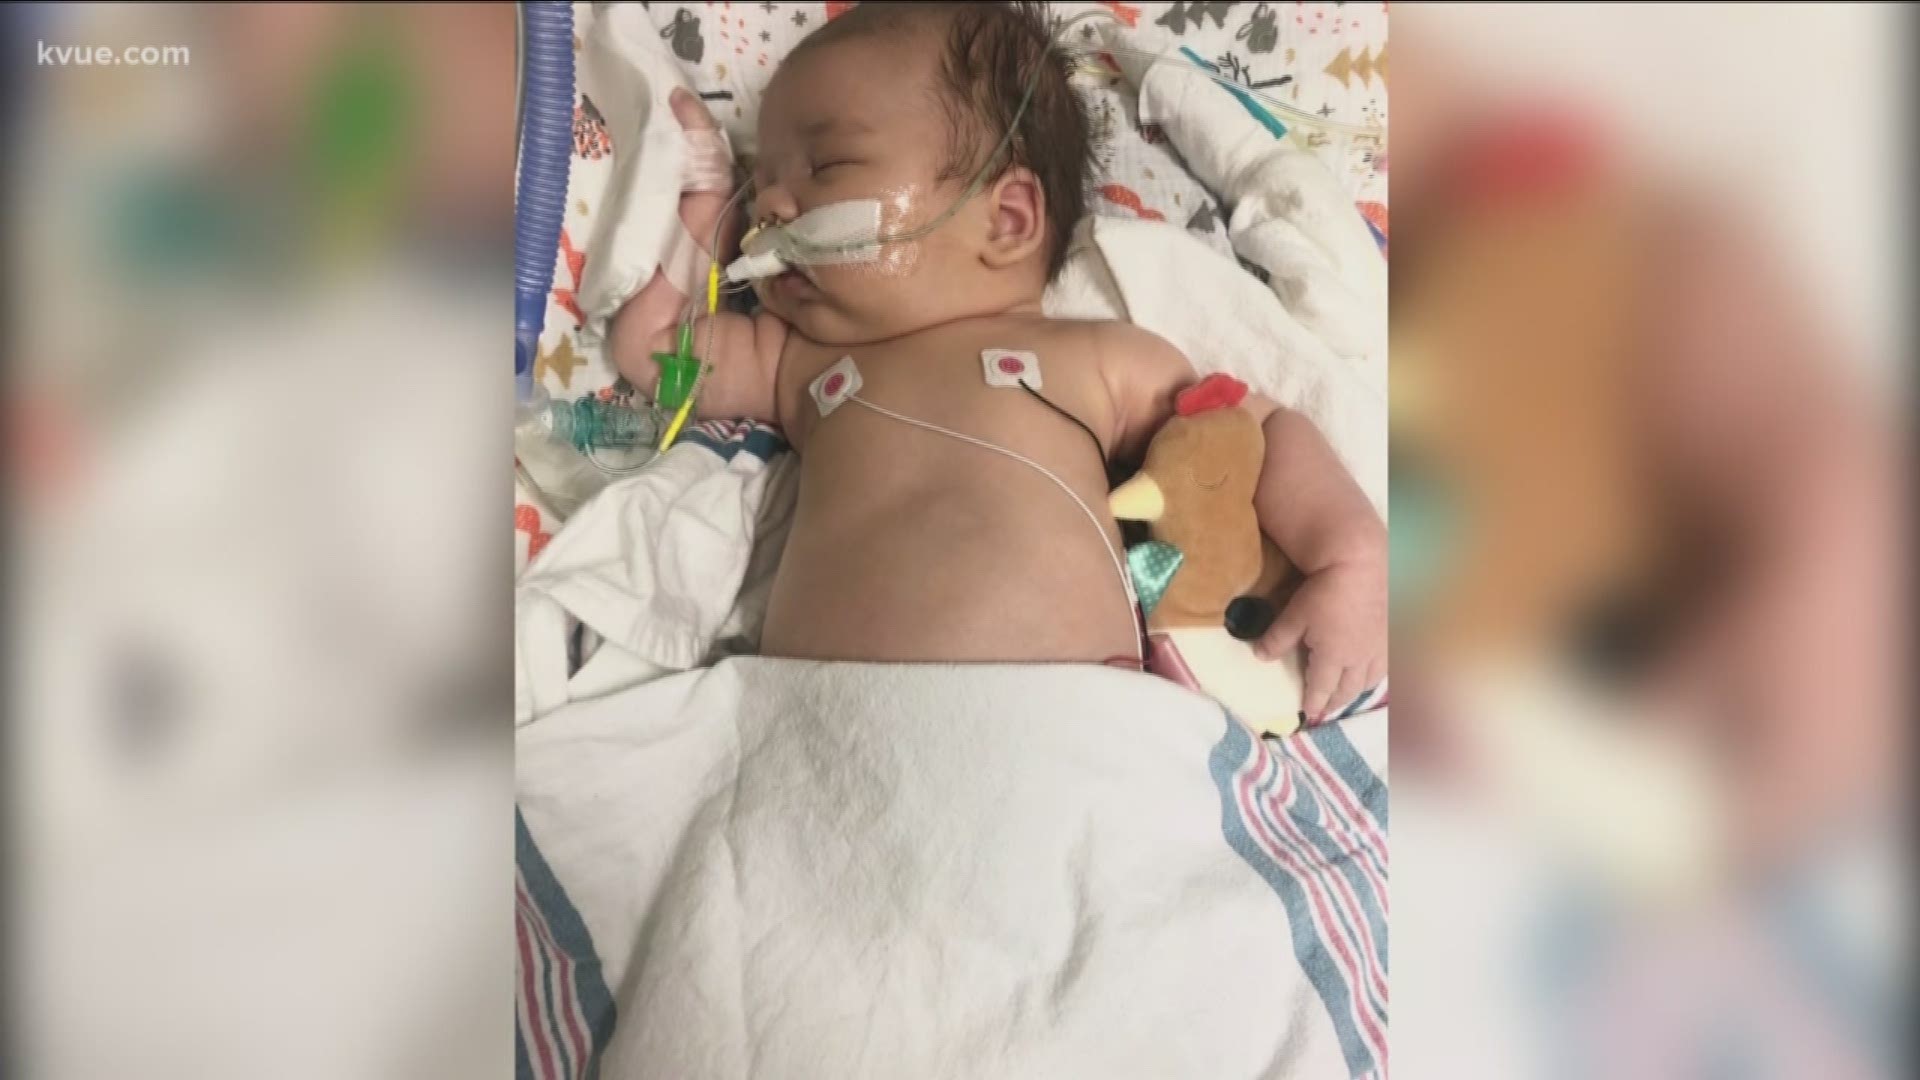 The baby is in critical condition on a ventilator and his family is trying to figure out why.